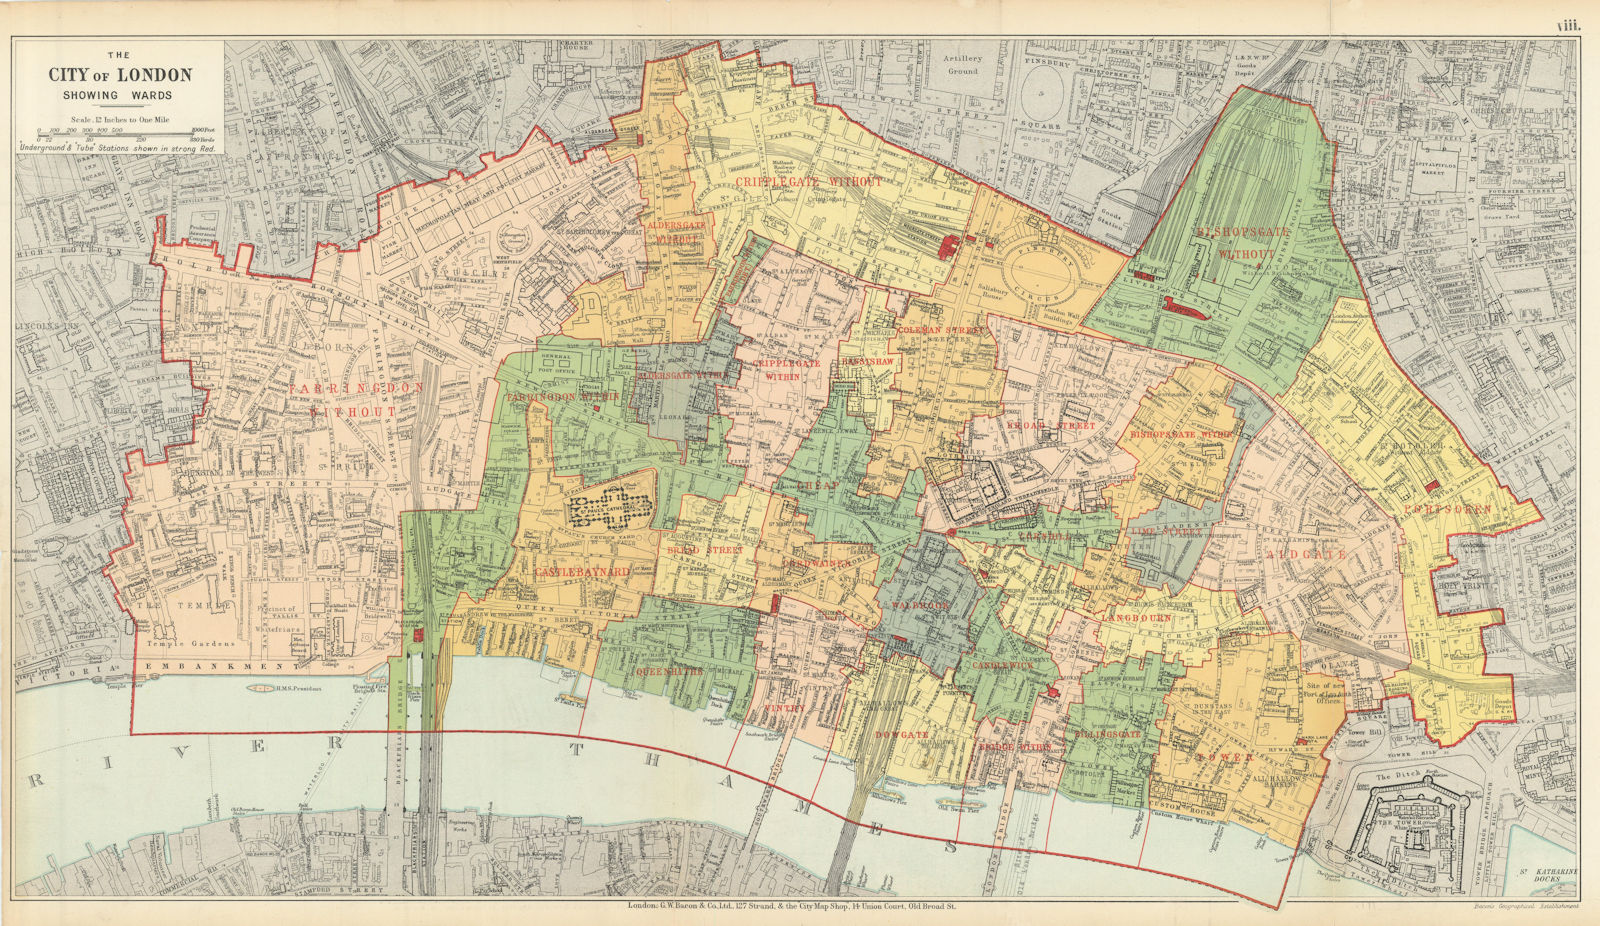 CITY OF LONDON showing WARDS. Churches & public buildings plans. BACON 1913 map